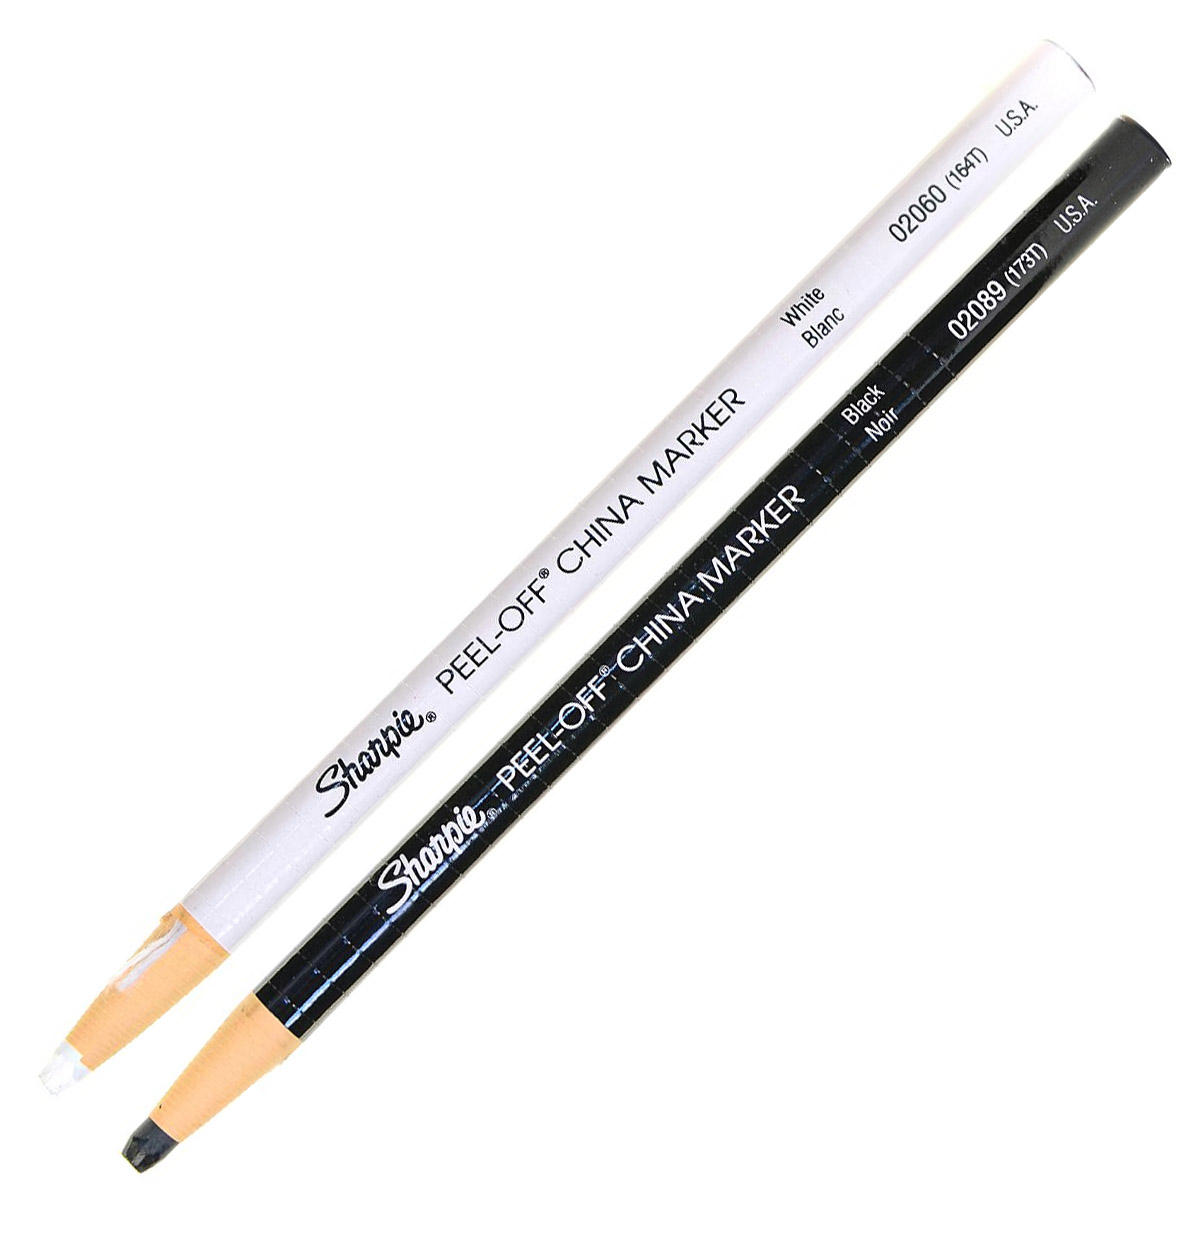 Peel-Off China Markers, Black, 2-Count (2173PP)